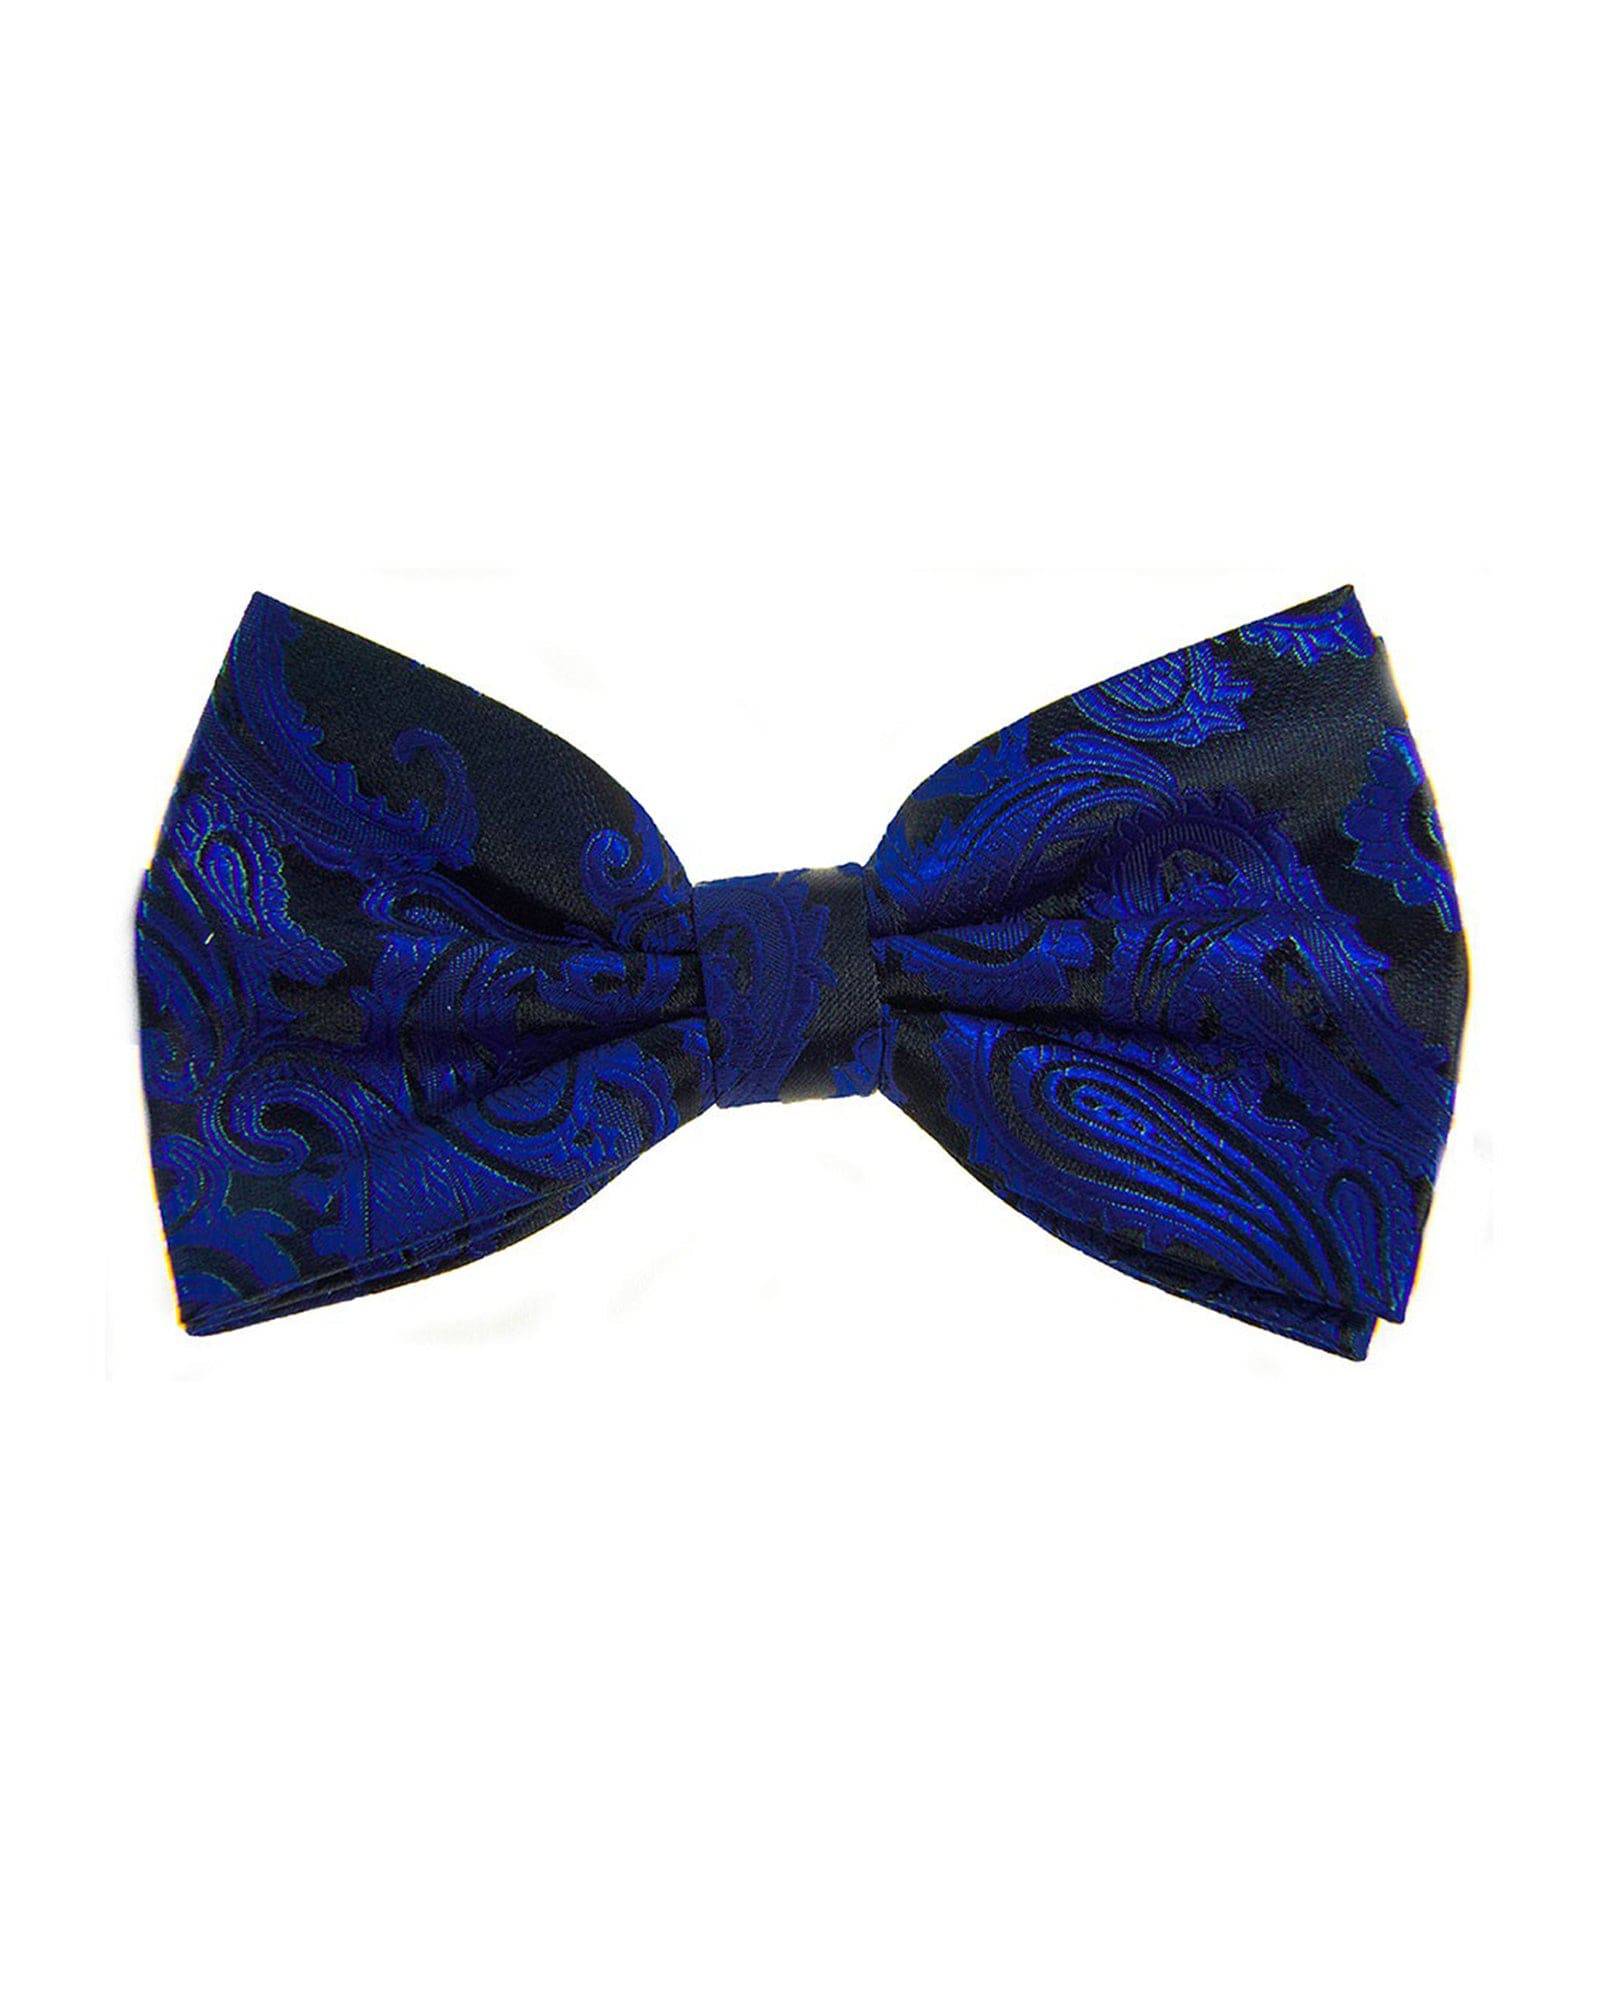 Bow Tie In Paisley Pattern Royal & Black - Rainwater's Men's Clothing and Tuxedo Rental